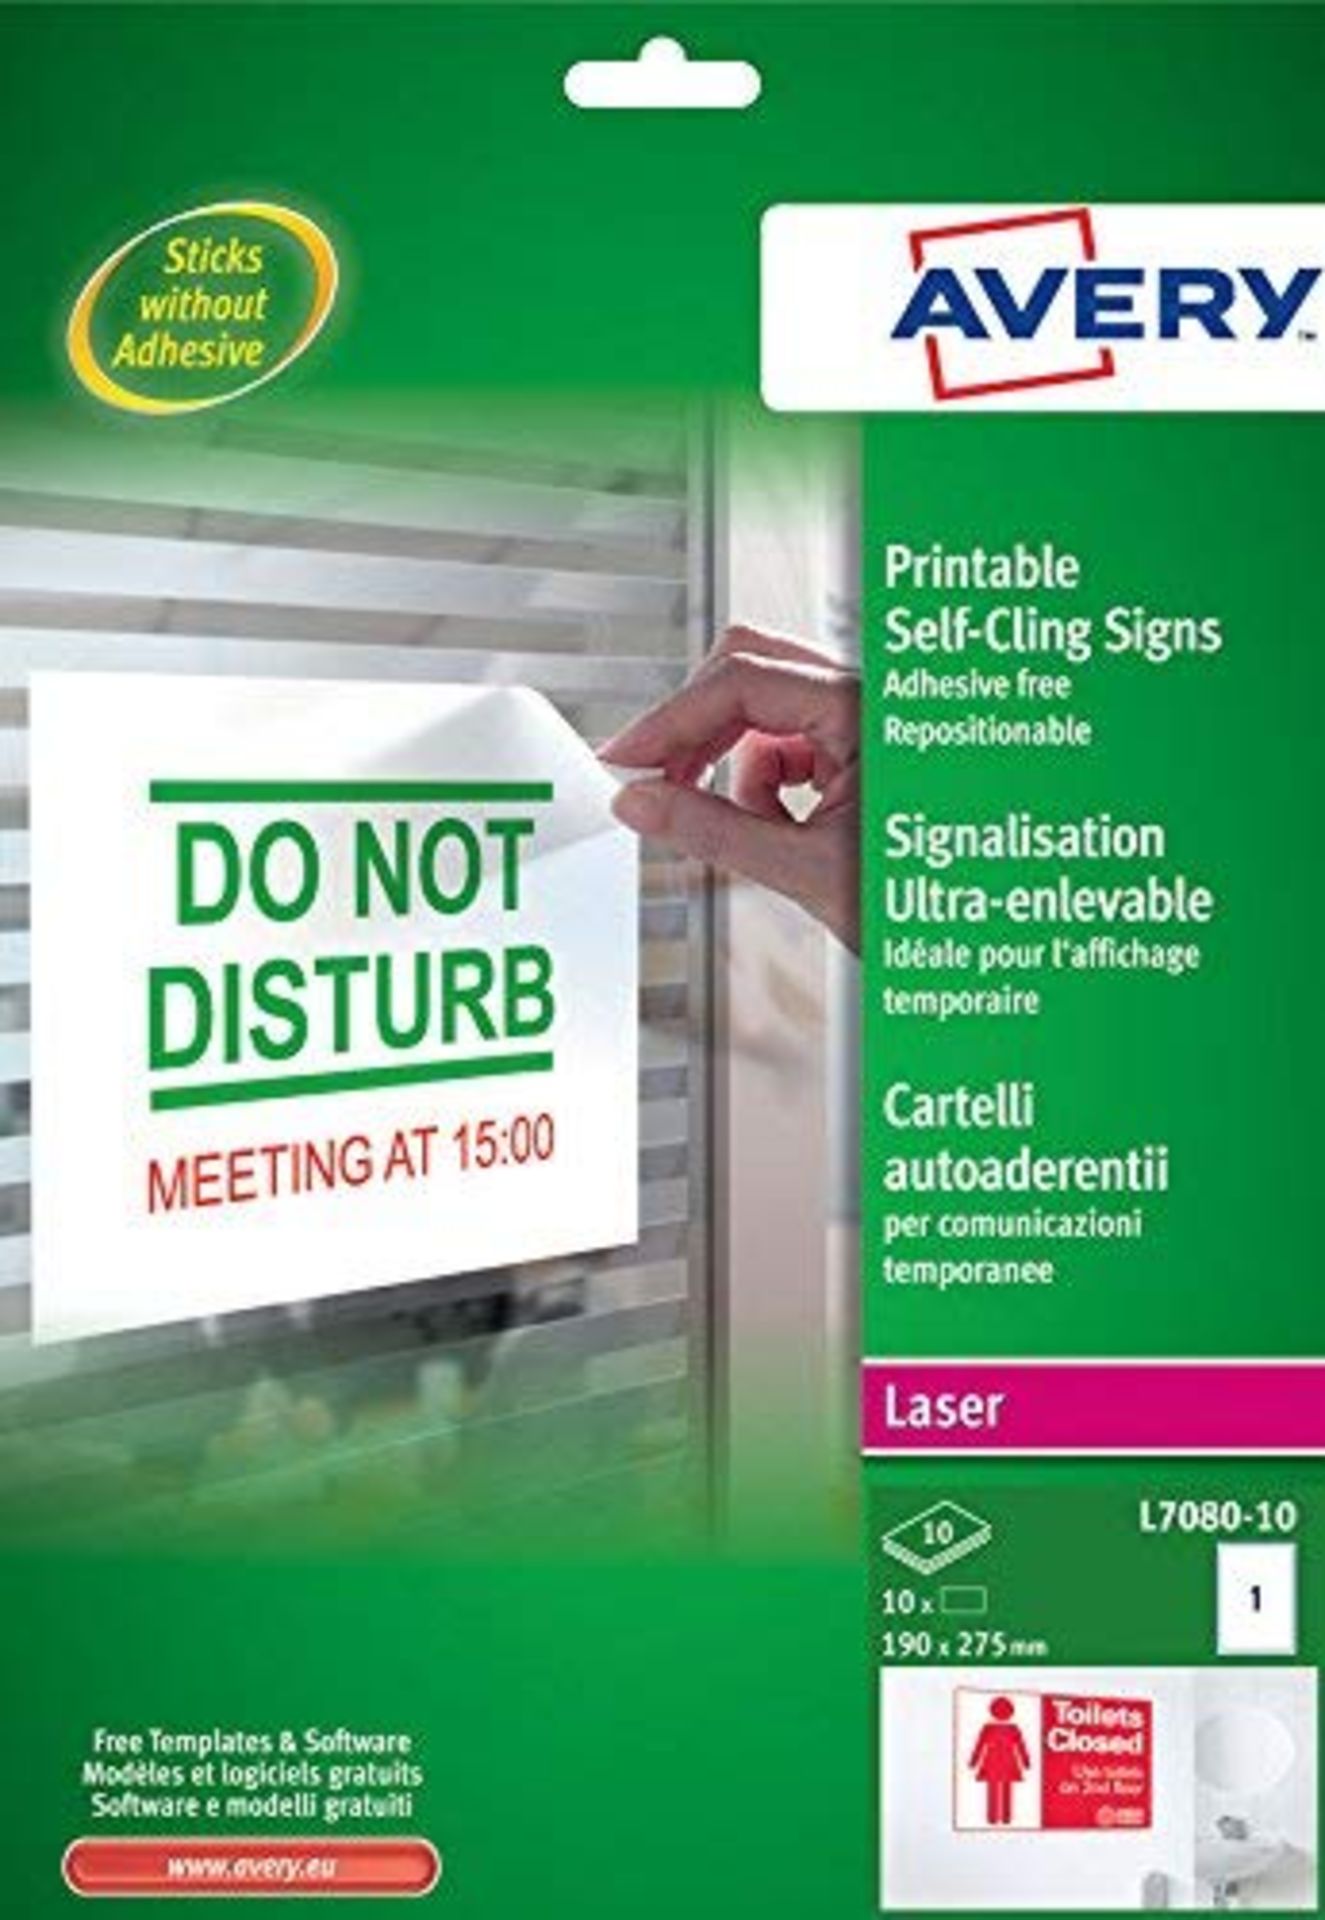 50 x avery l7080-10 repositional adhesive-free self-cling signs for laser printers (a4 sheets of 190